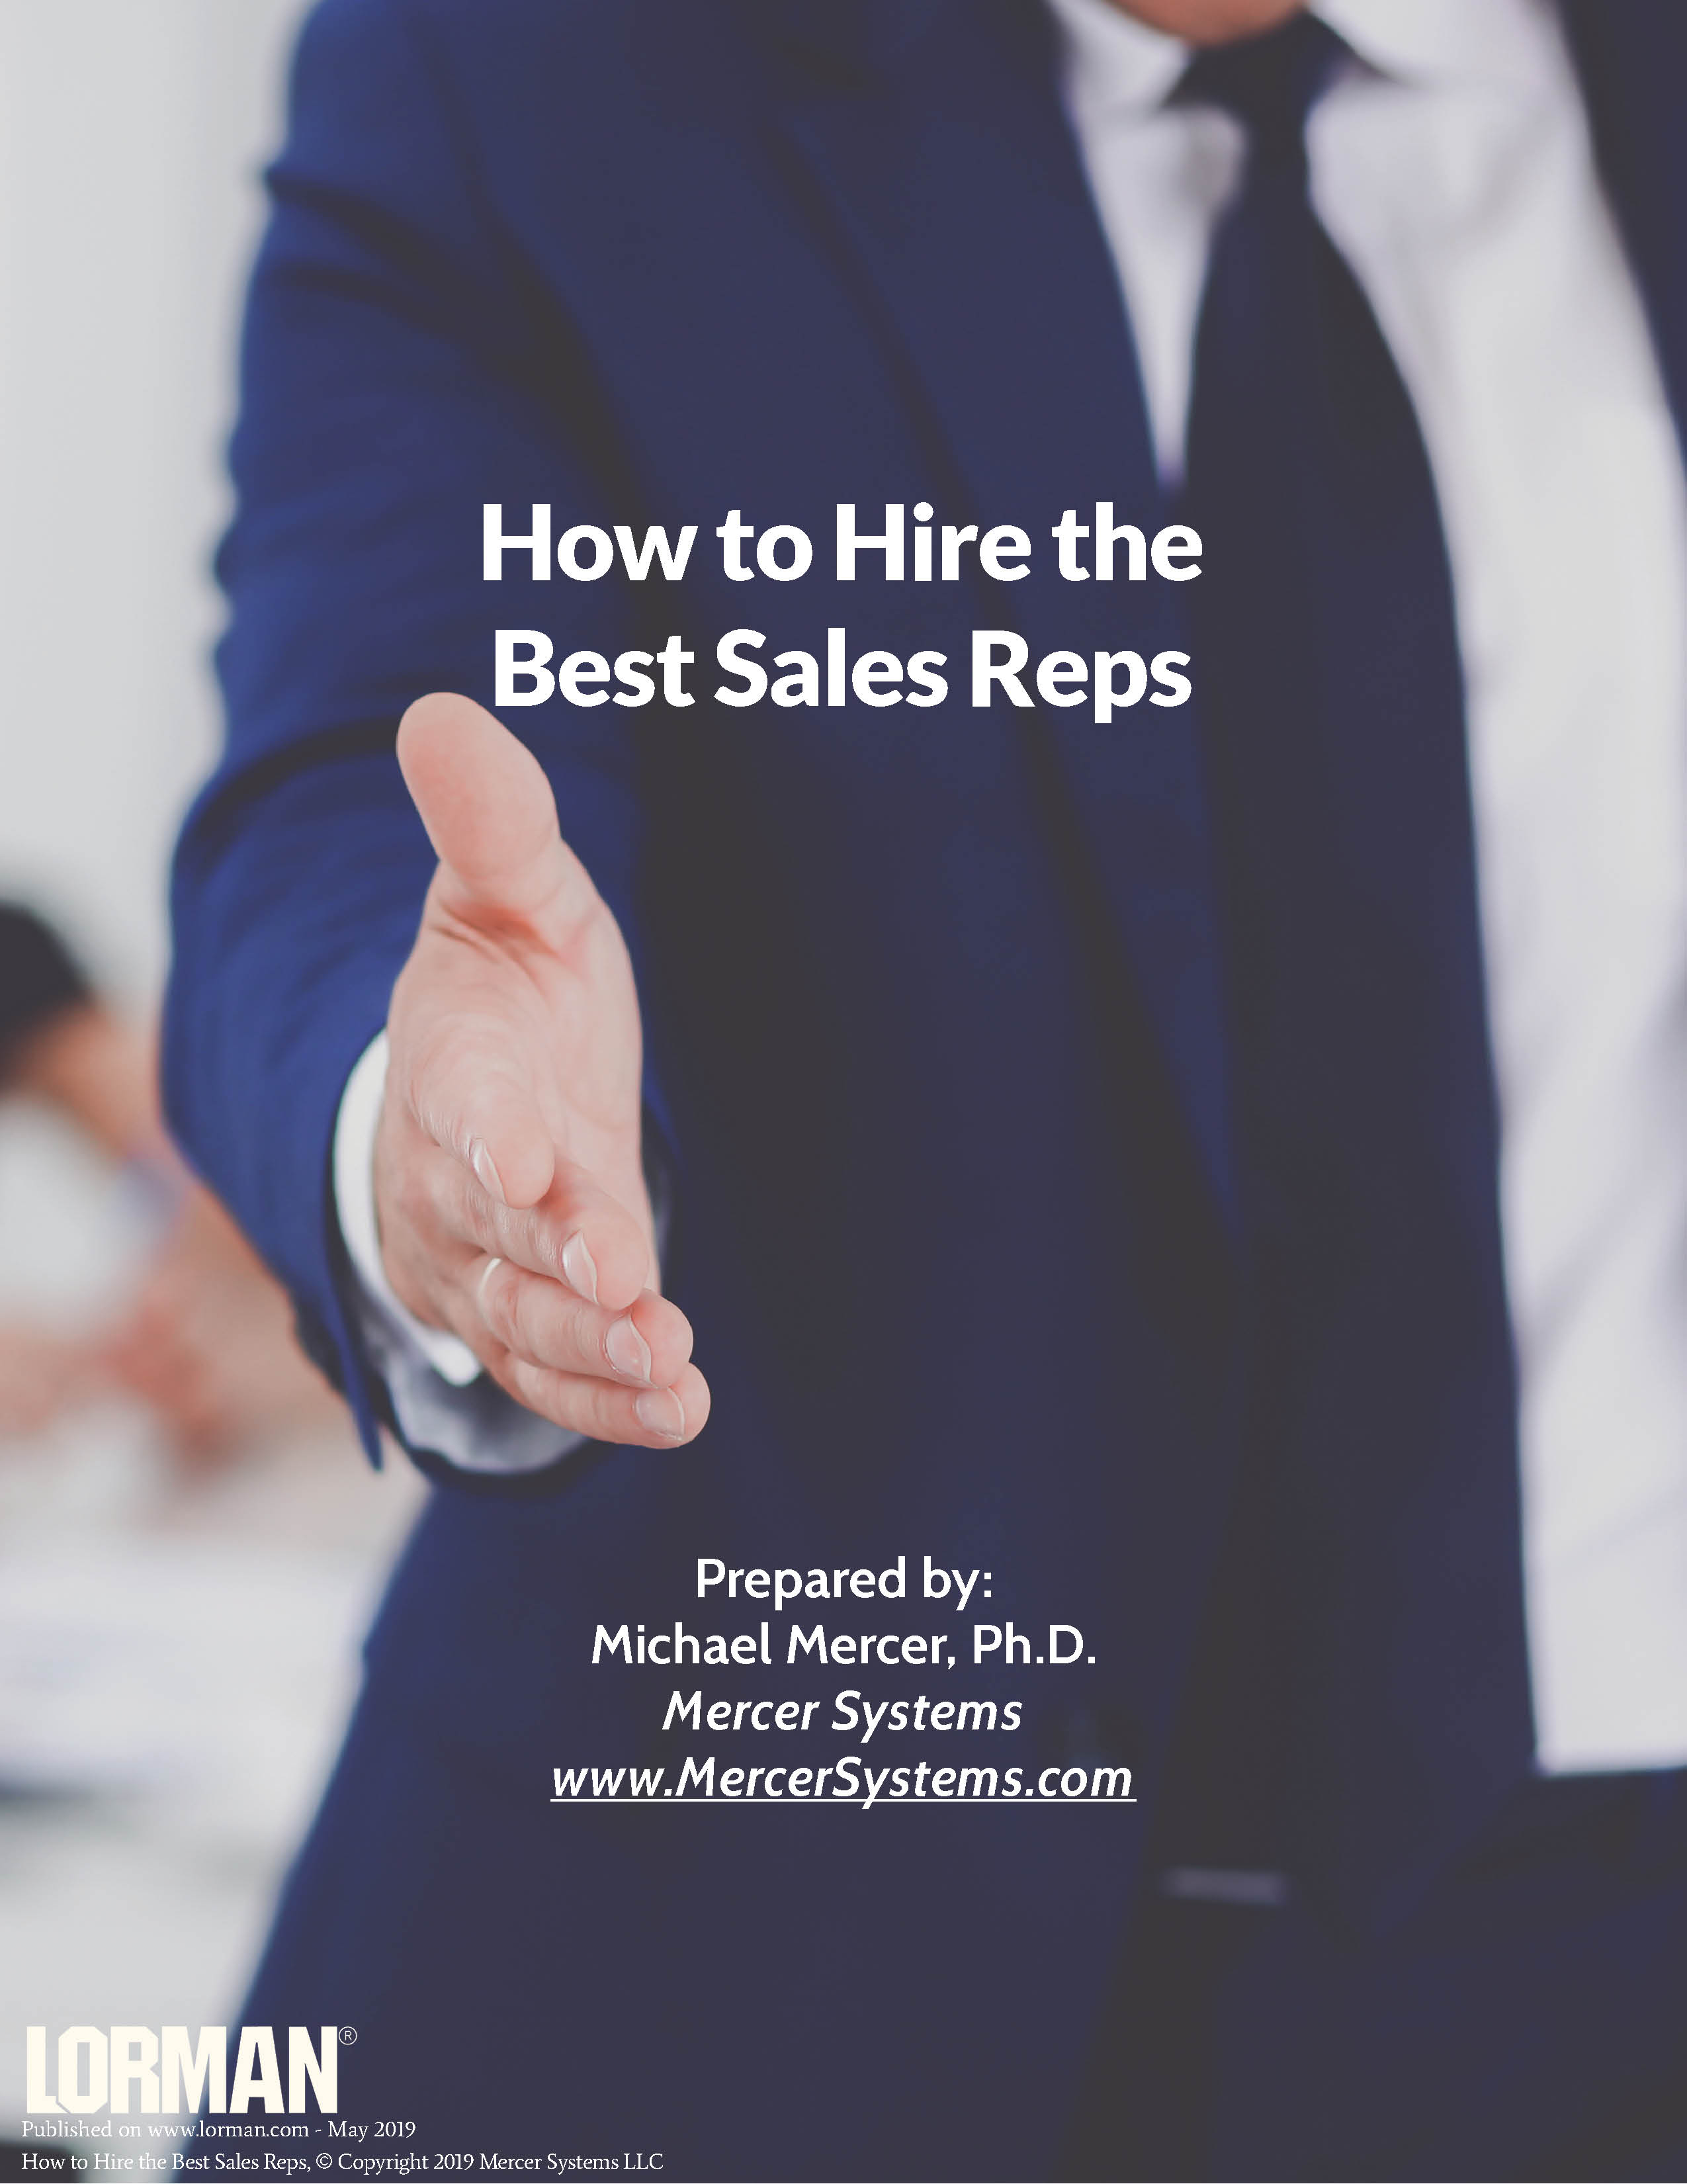 How to Hire the Best Sales Reps